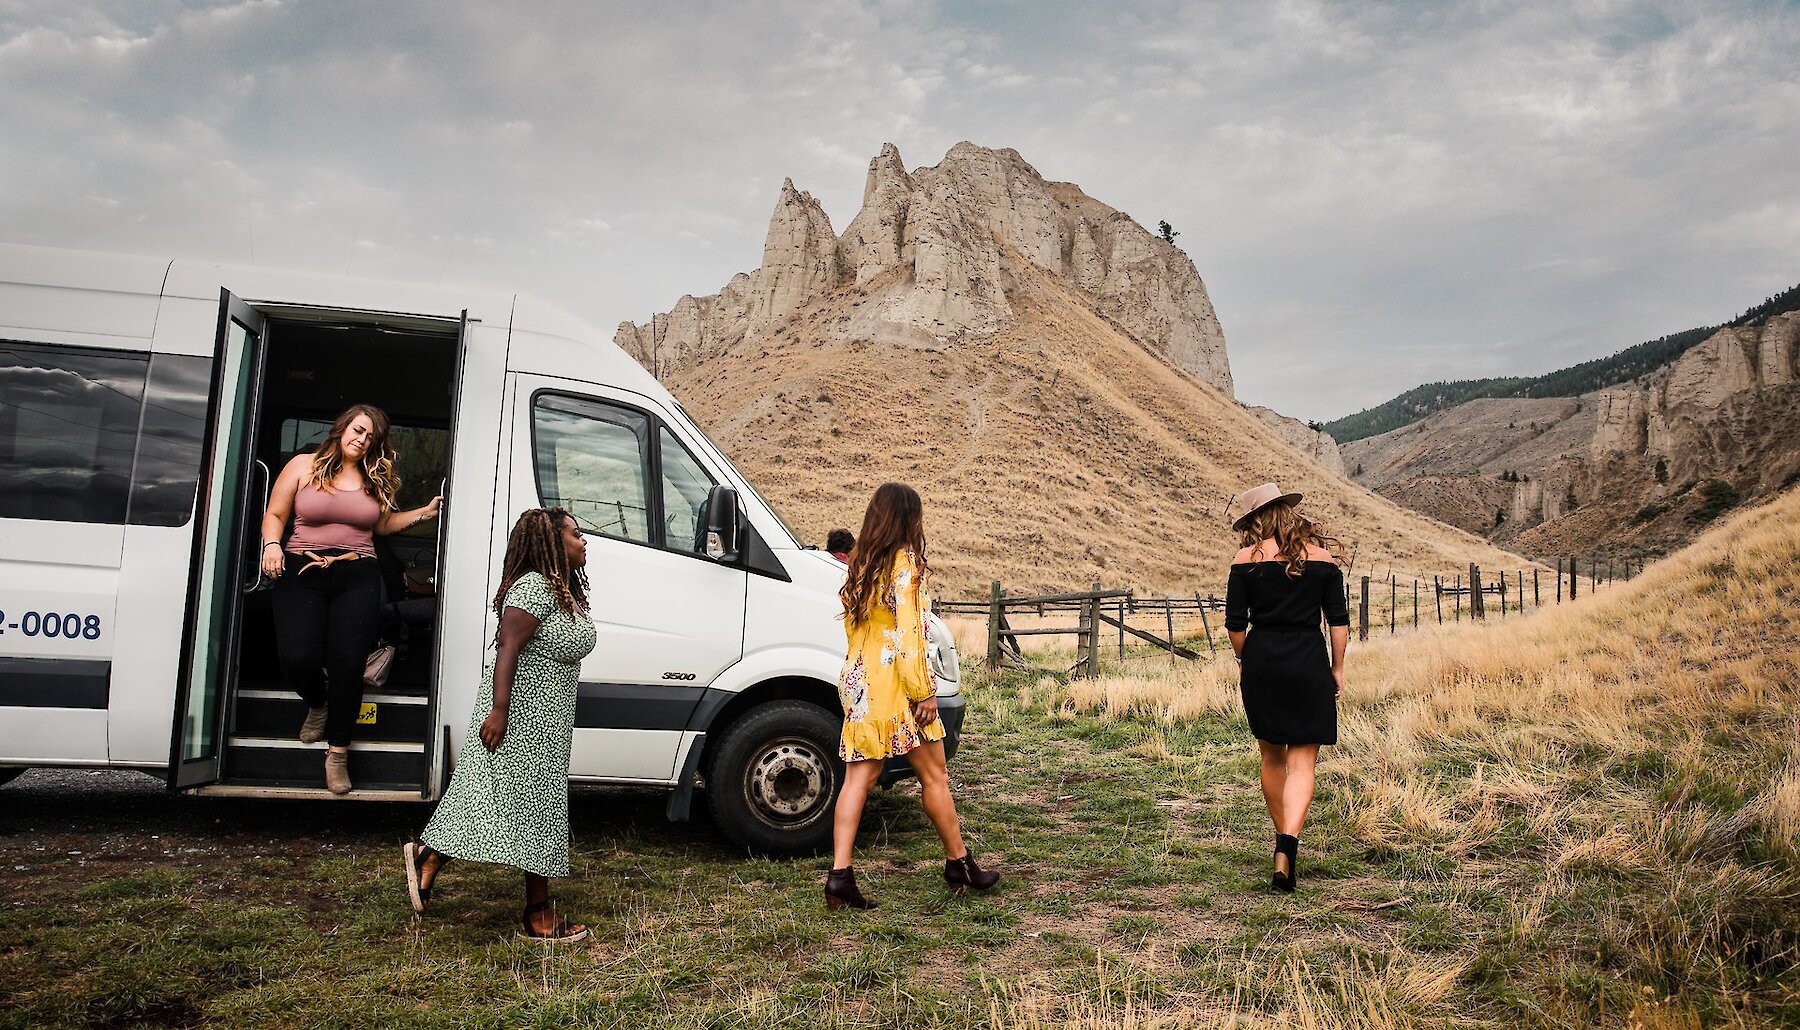 A group of women stepping off a wine tour bus with scenic hoodoos in the background in Kamloops British Columbia.